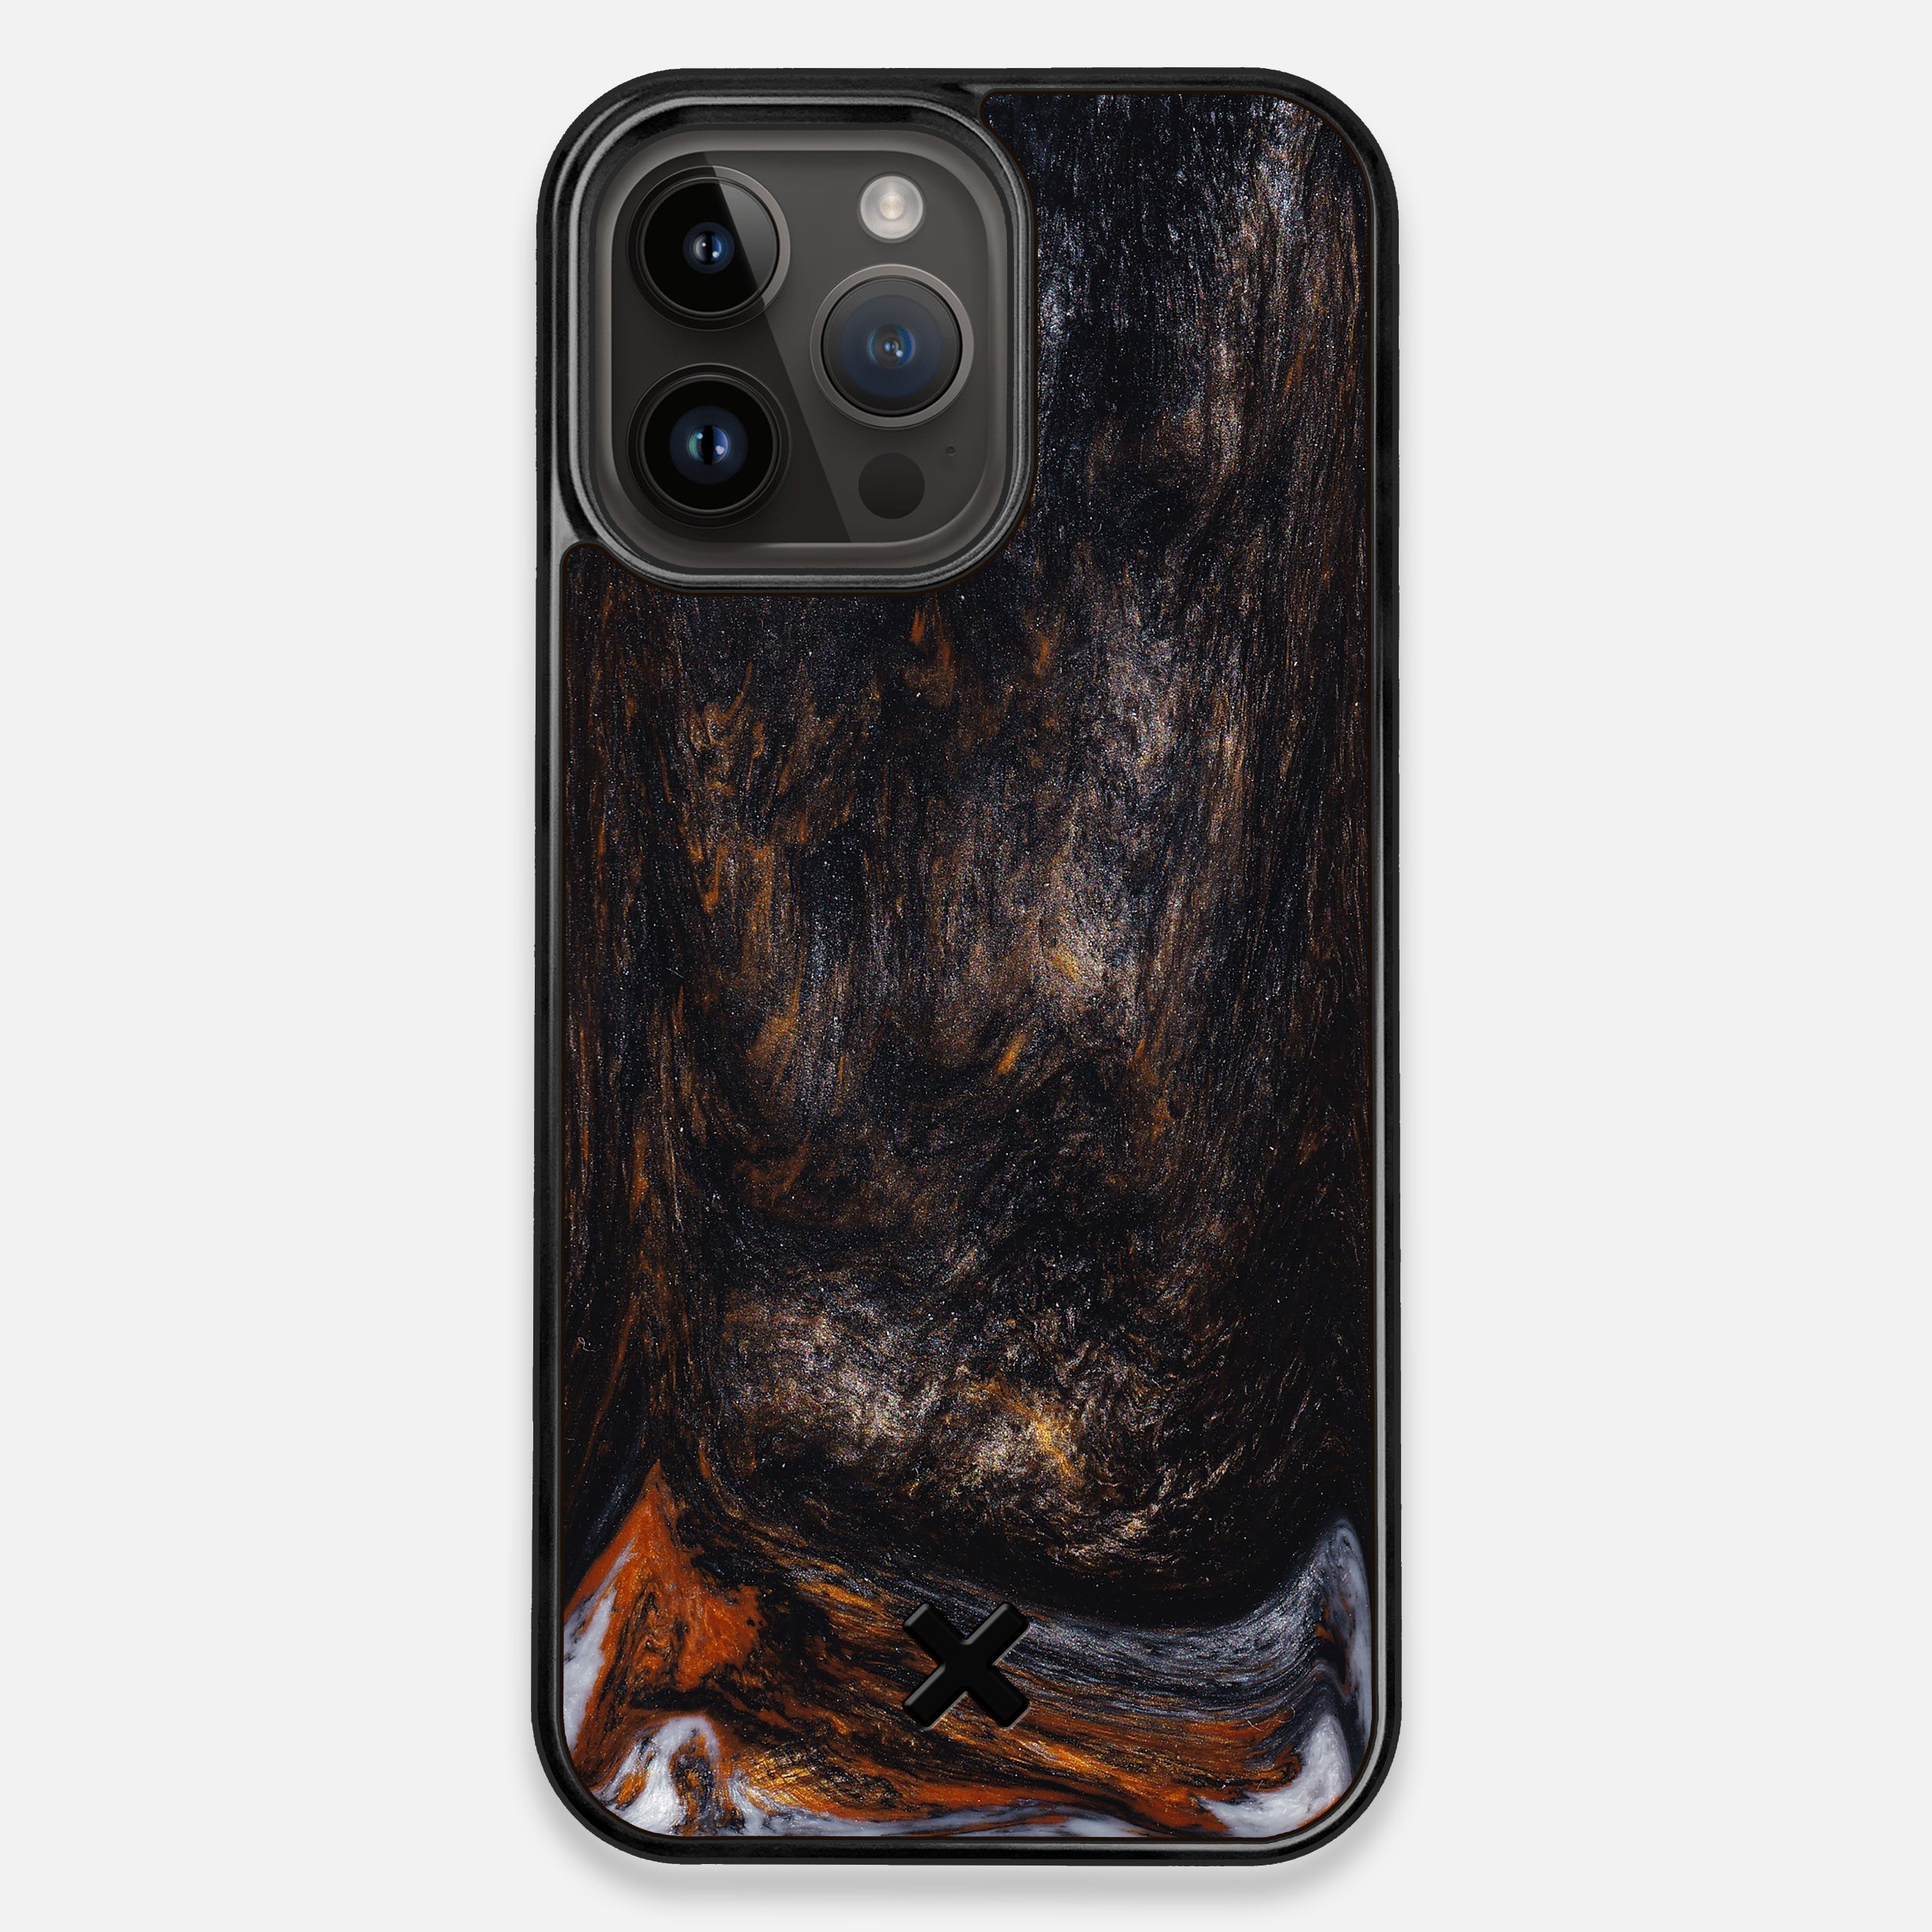 One & Only - Wood and Resin Case - #01570